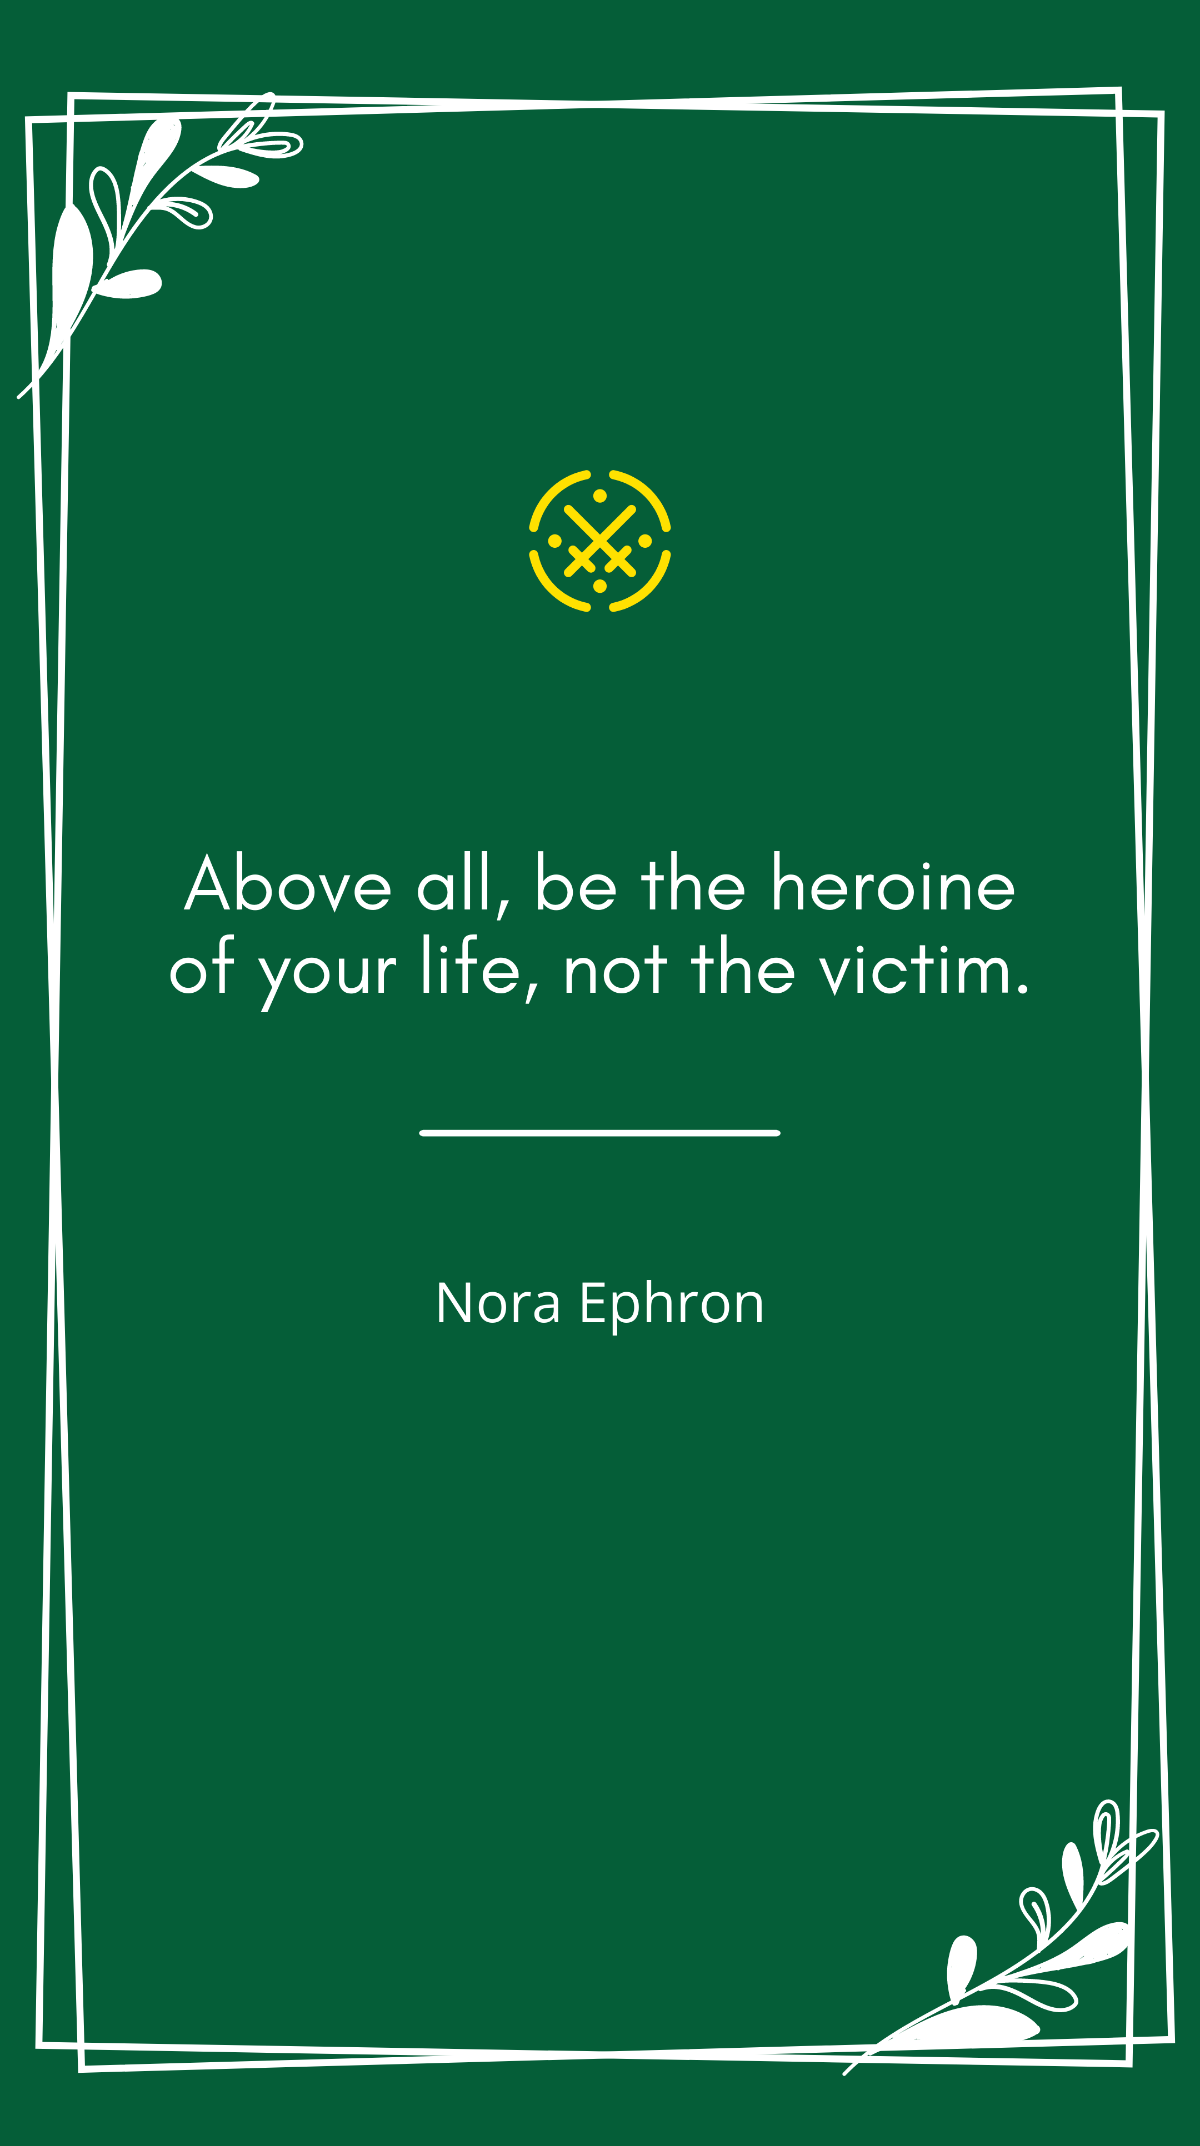 Nora Ephron - “Above all, be the heroine of your life, not the victim.”